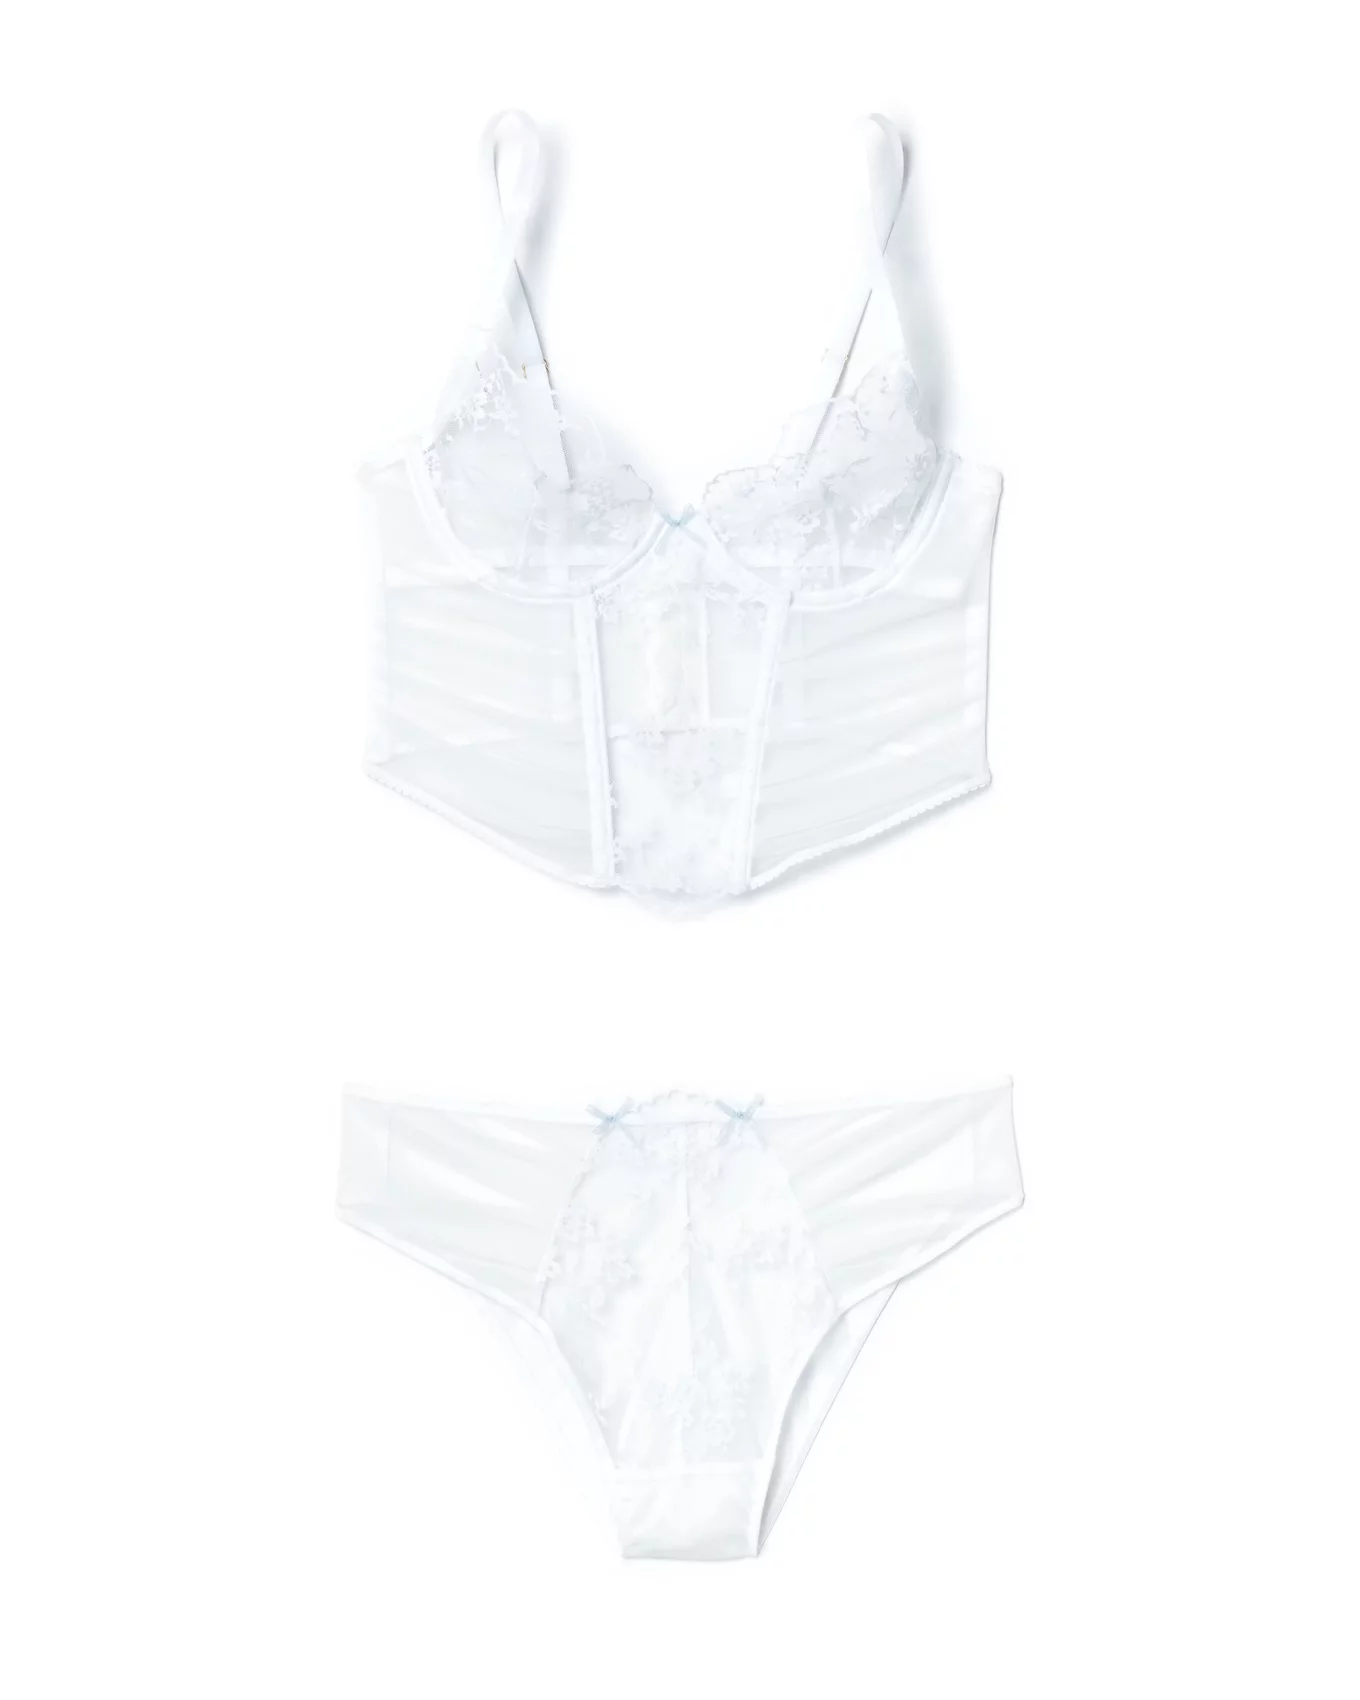 Lacey White Lingerie Set, Lace Corset Bra Panty and Garter Set